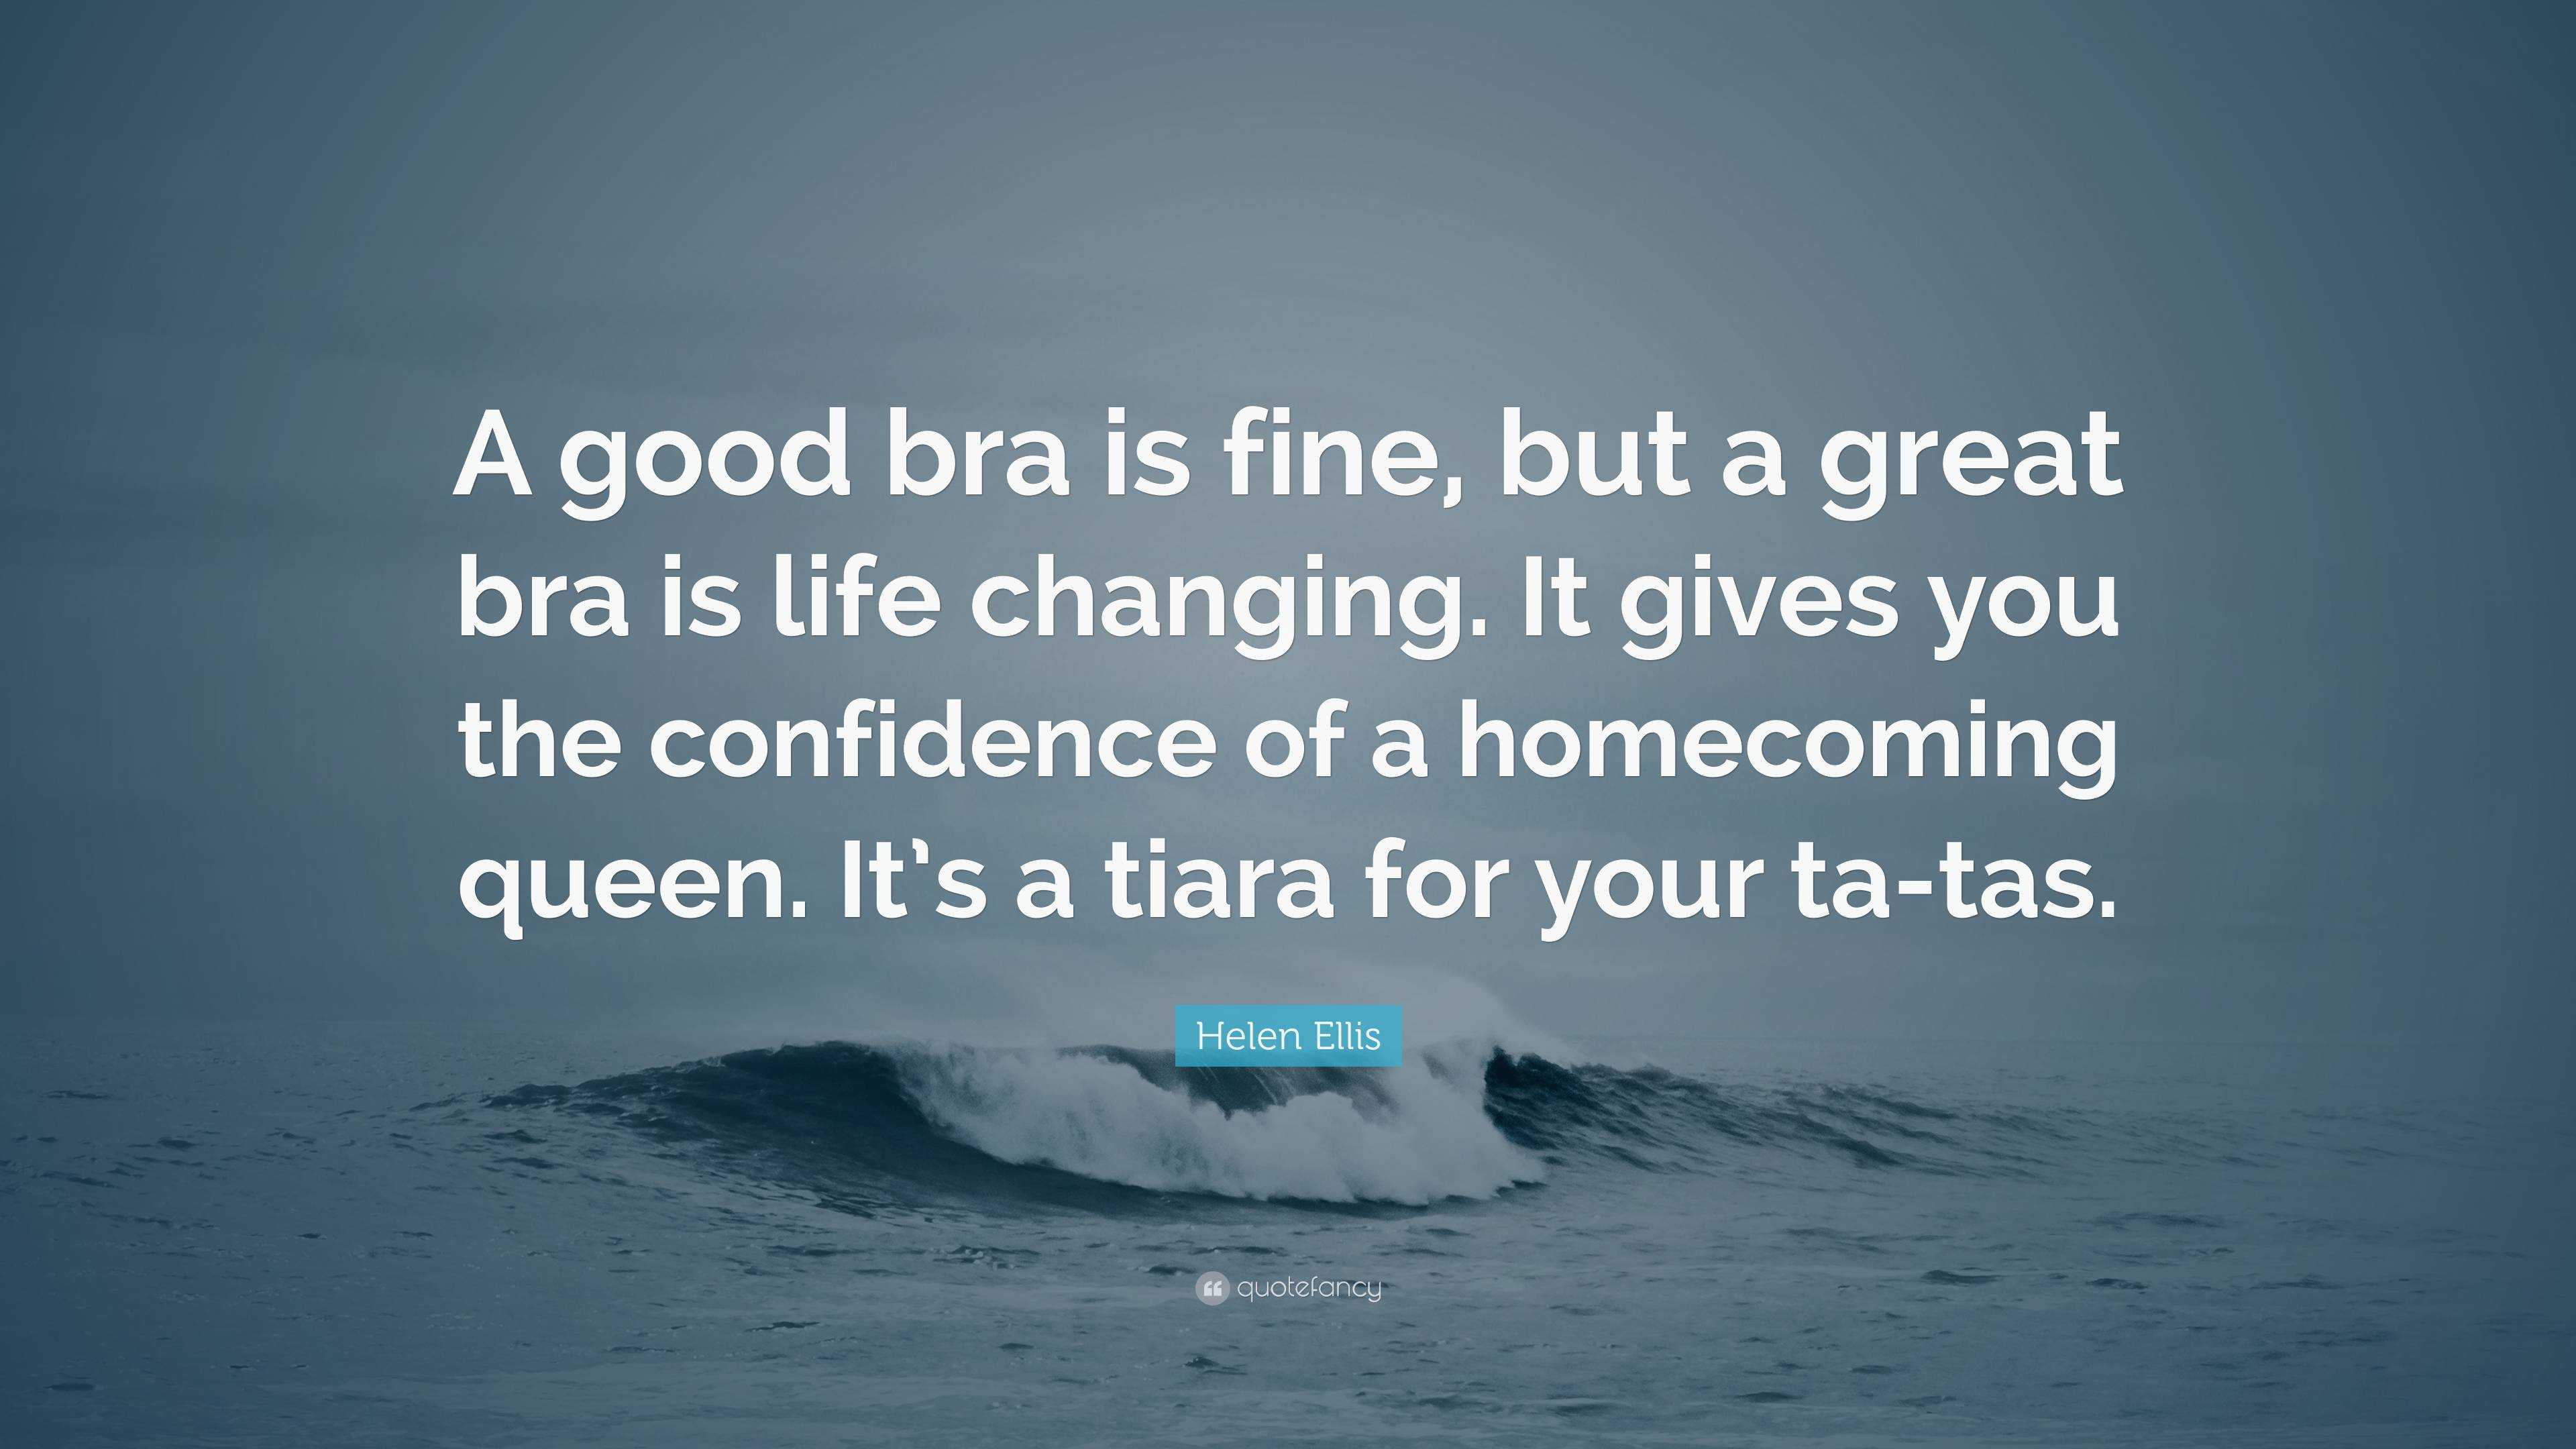 Helen Ellis Quote: “A good bra is fine, but a great bra is life changing.  It gives you the confidence of a homecoming queen. It's a tiara fo”